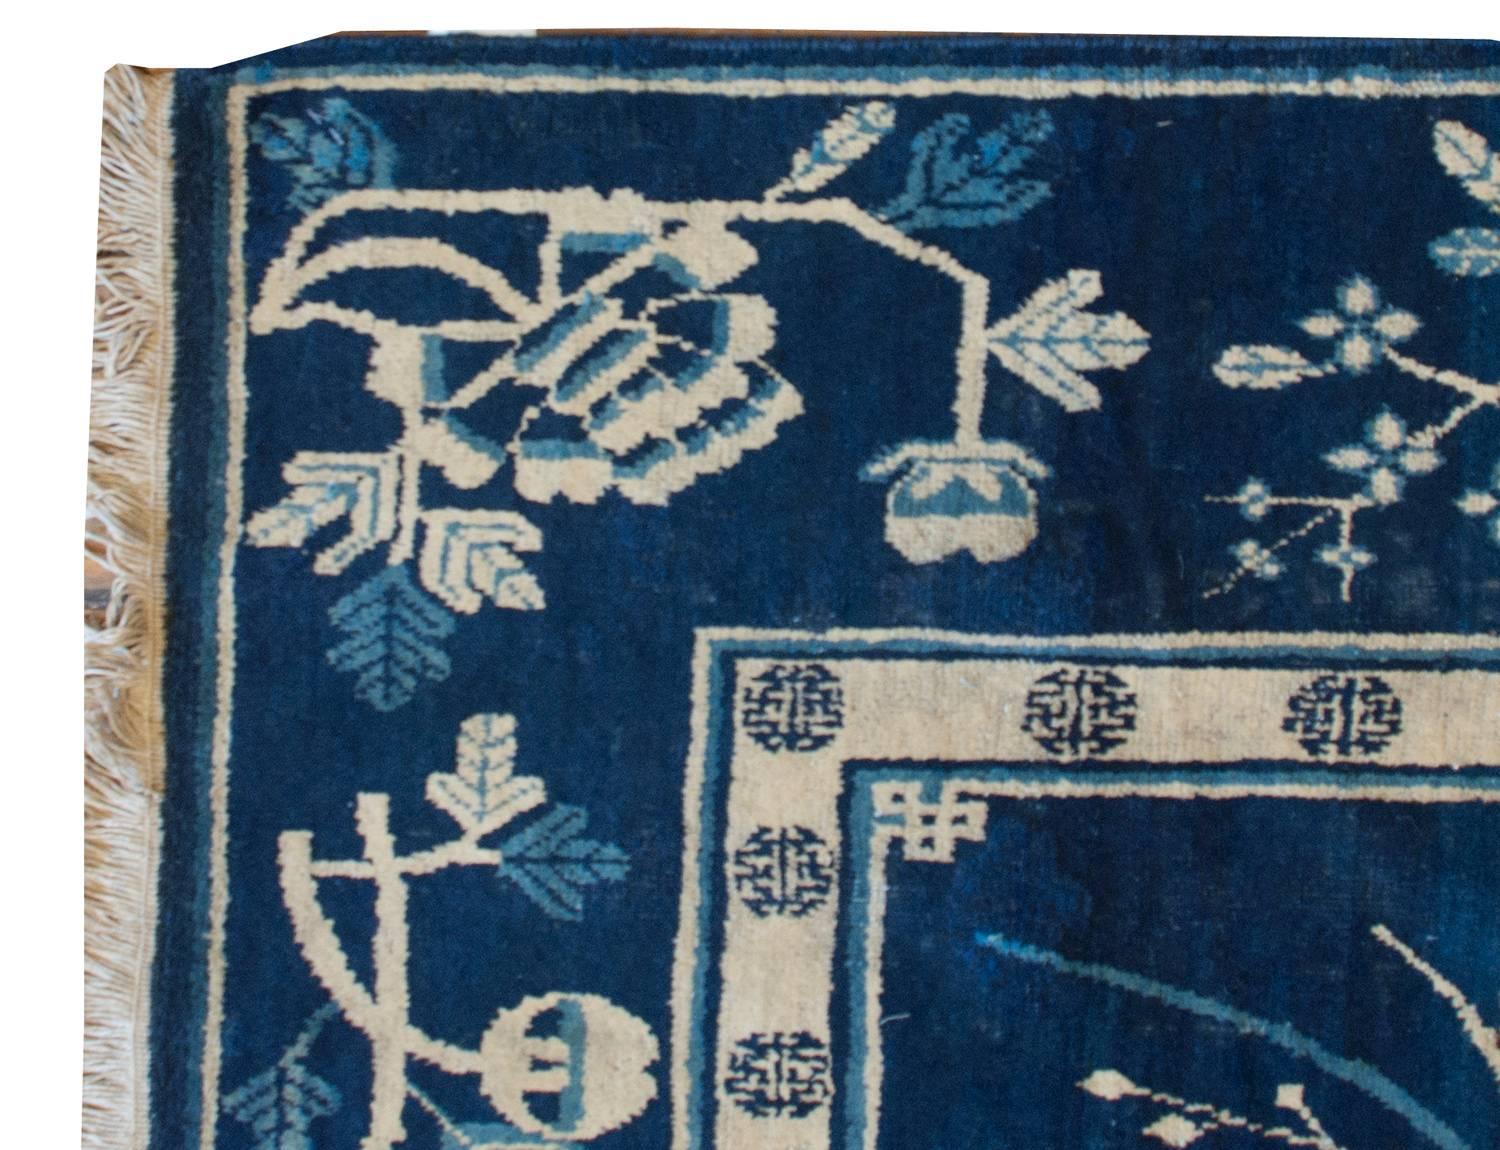 An extremely rare early 20th century pictorial Chinese rug depicting Chinese scholar's objects like potted peonies and chrysanthemums, citron (Buddha's Fingers) with a censor, and a peach, all symbols of longevity and prosperity. The border is